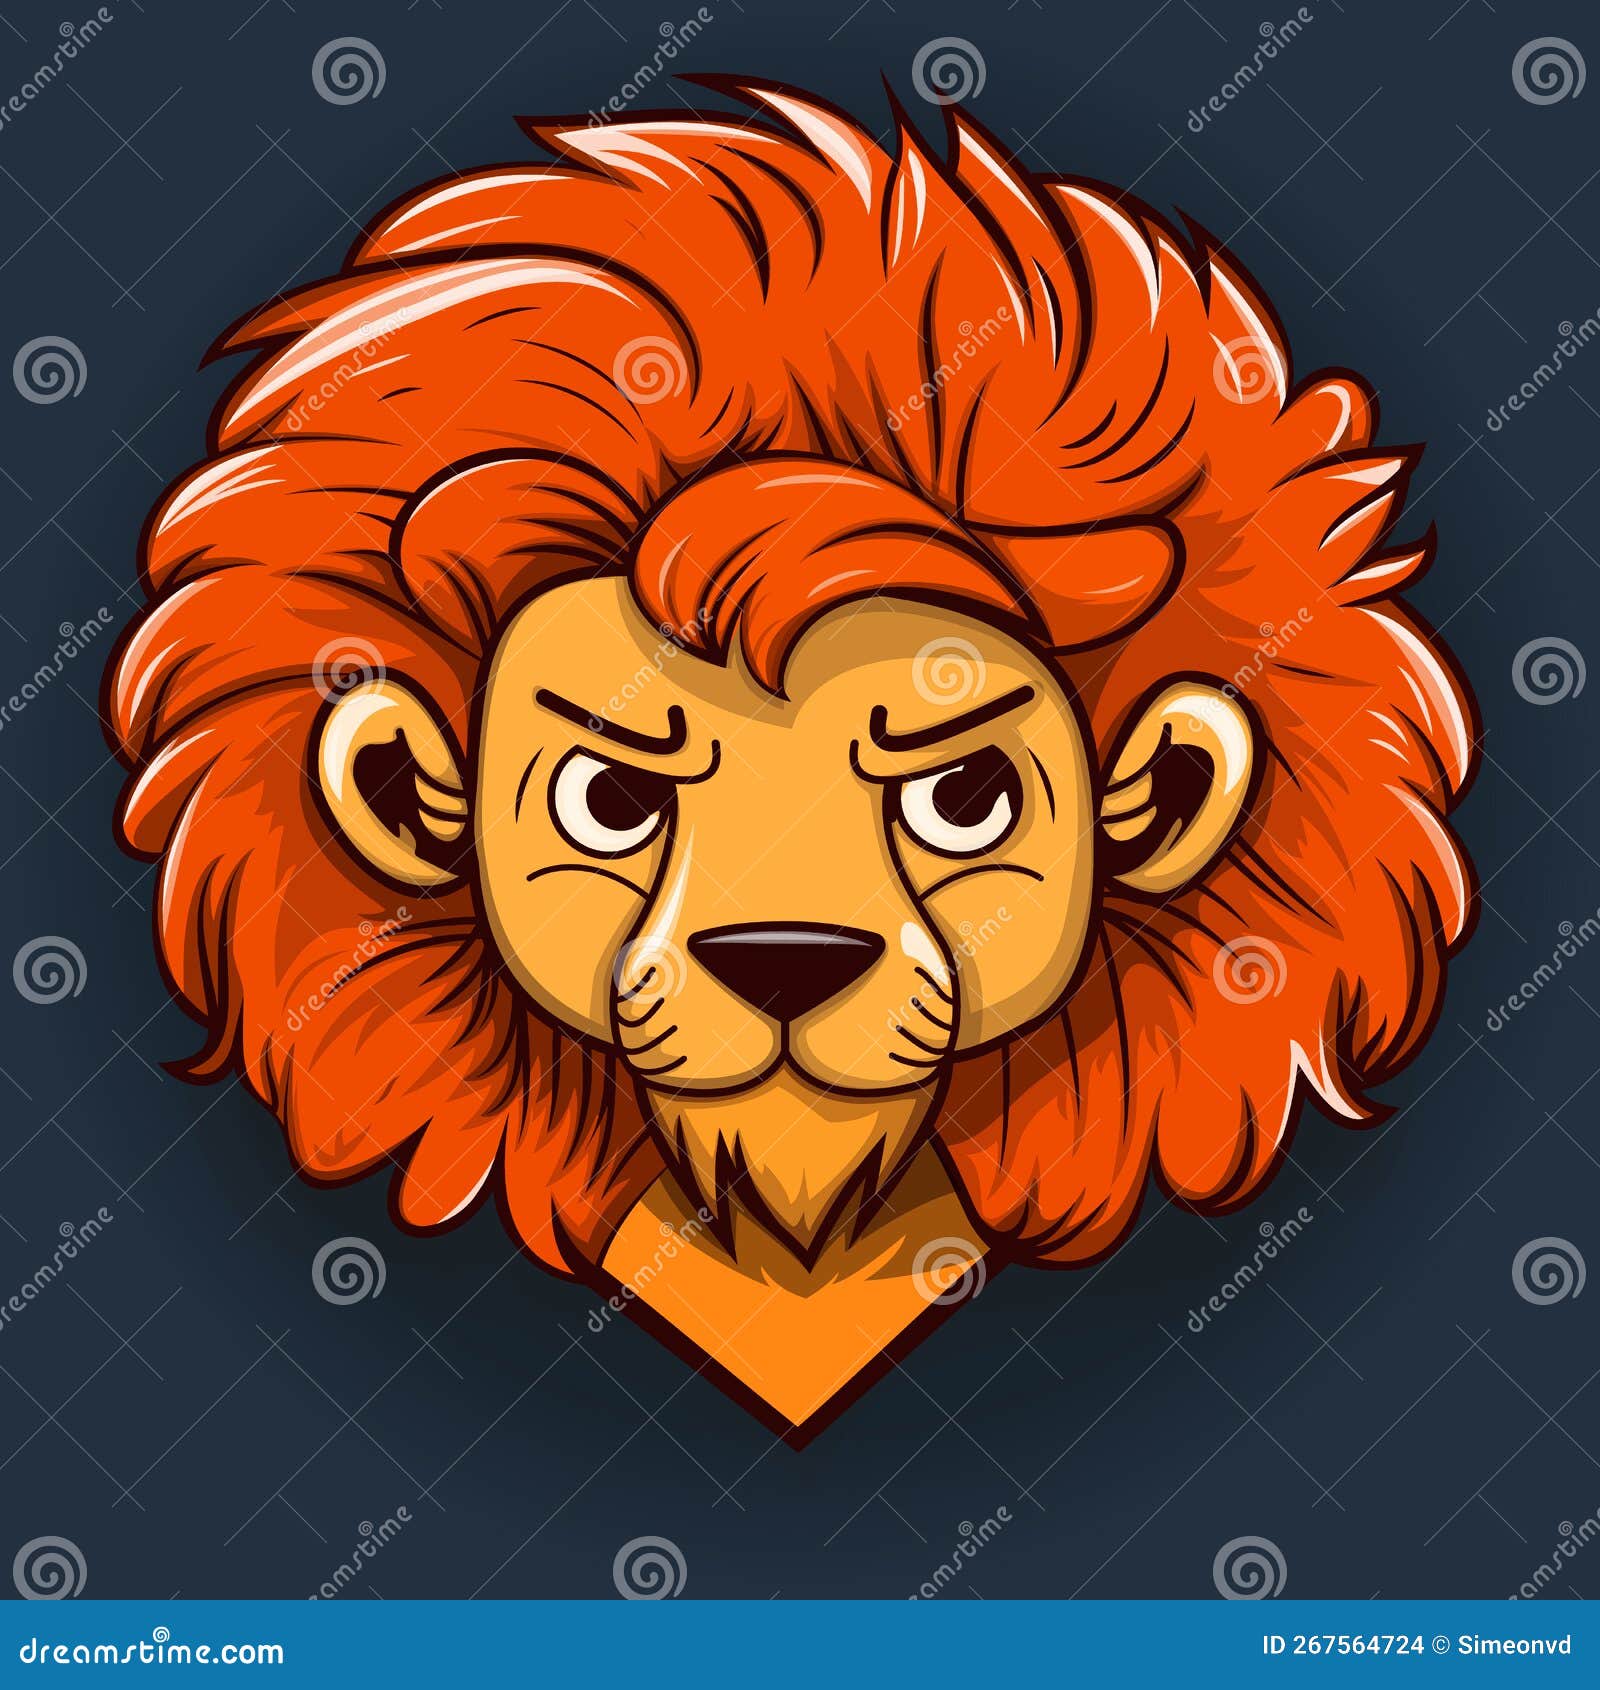 Cute Lion Head. Young Lion Face Stock Vector - Illustration of emblem,  happy: 267564724